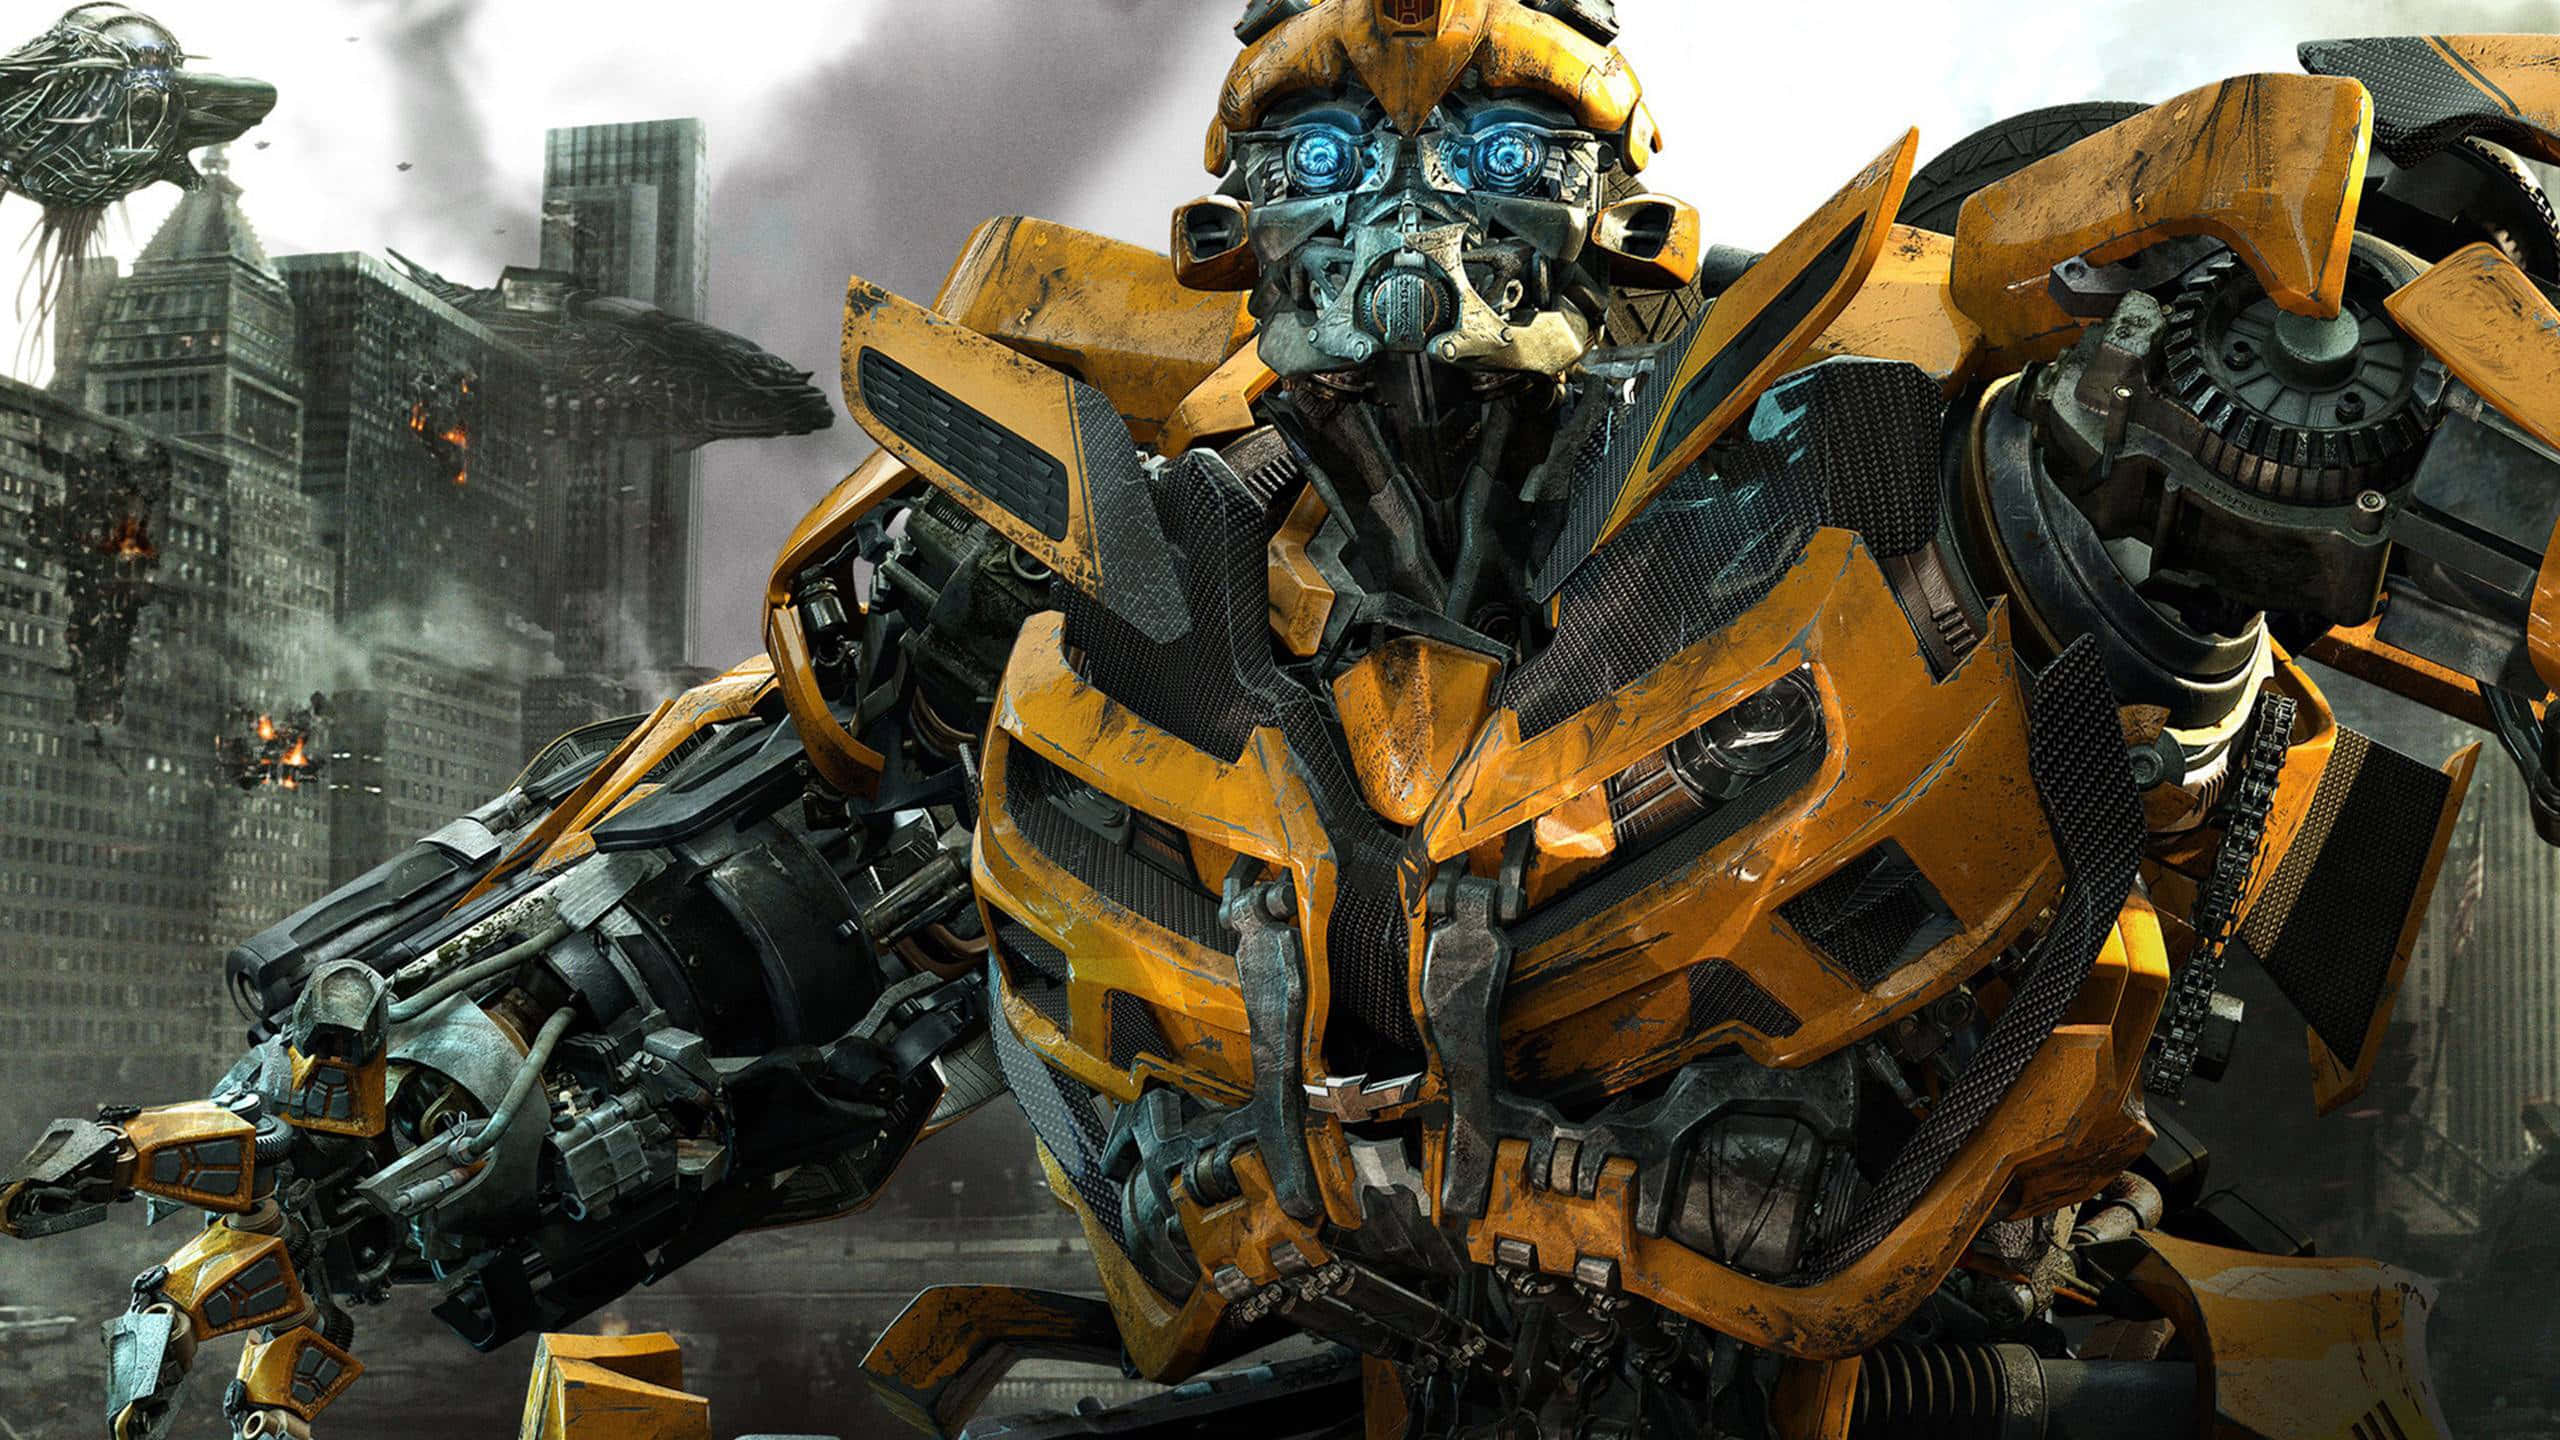 Transformers The Last Knight - Bumblebee